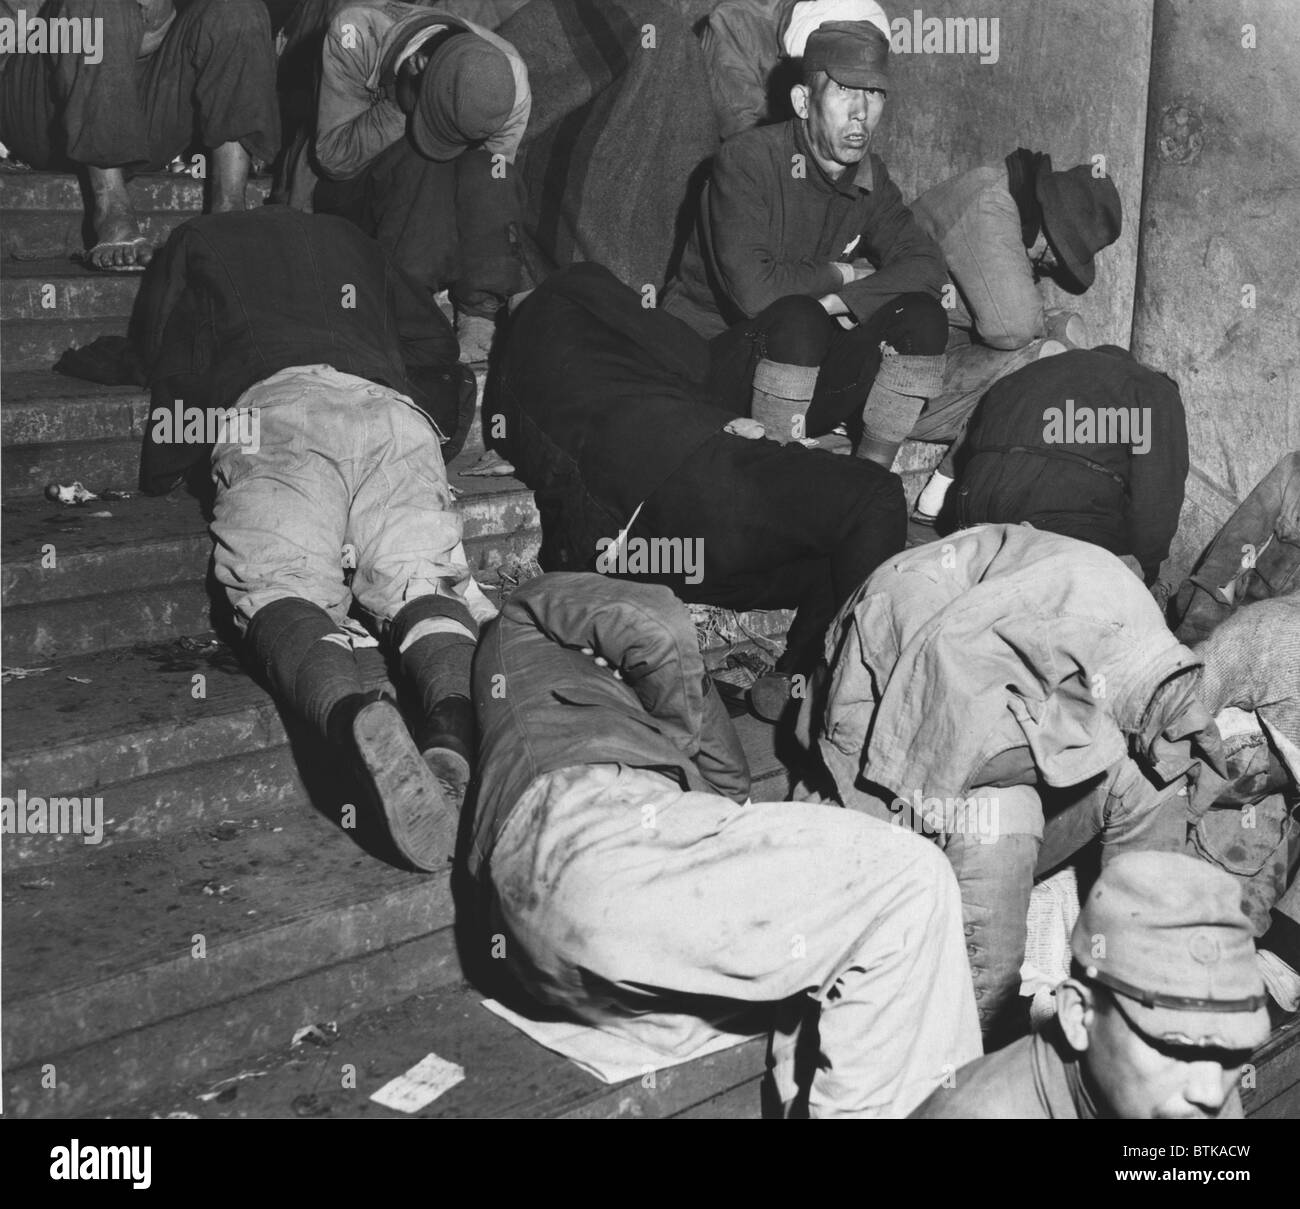 Homeless Japanese in Tokyo, months after Japan's World War II surrender, spend the night on the steps of one of Tokyo's subway stations. Many discharged soldiers are still wearing their military uniforms. Dec. 6, 1945. Stock Photo